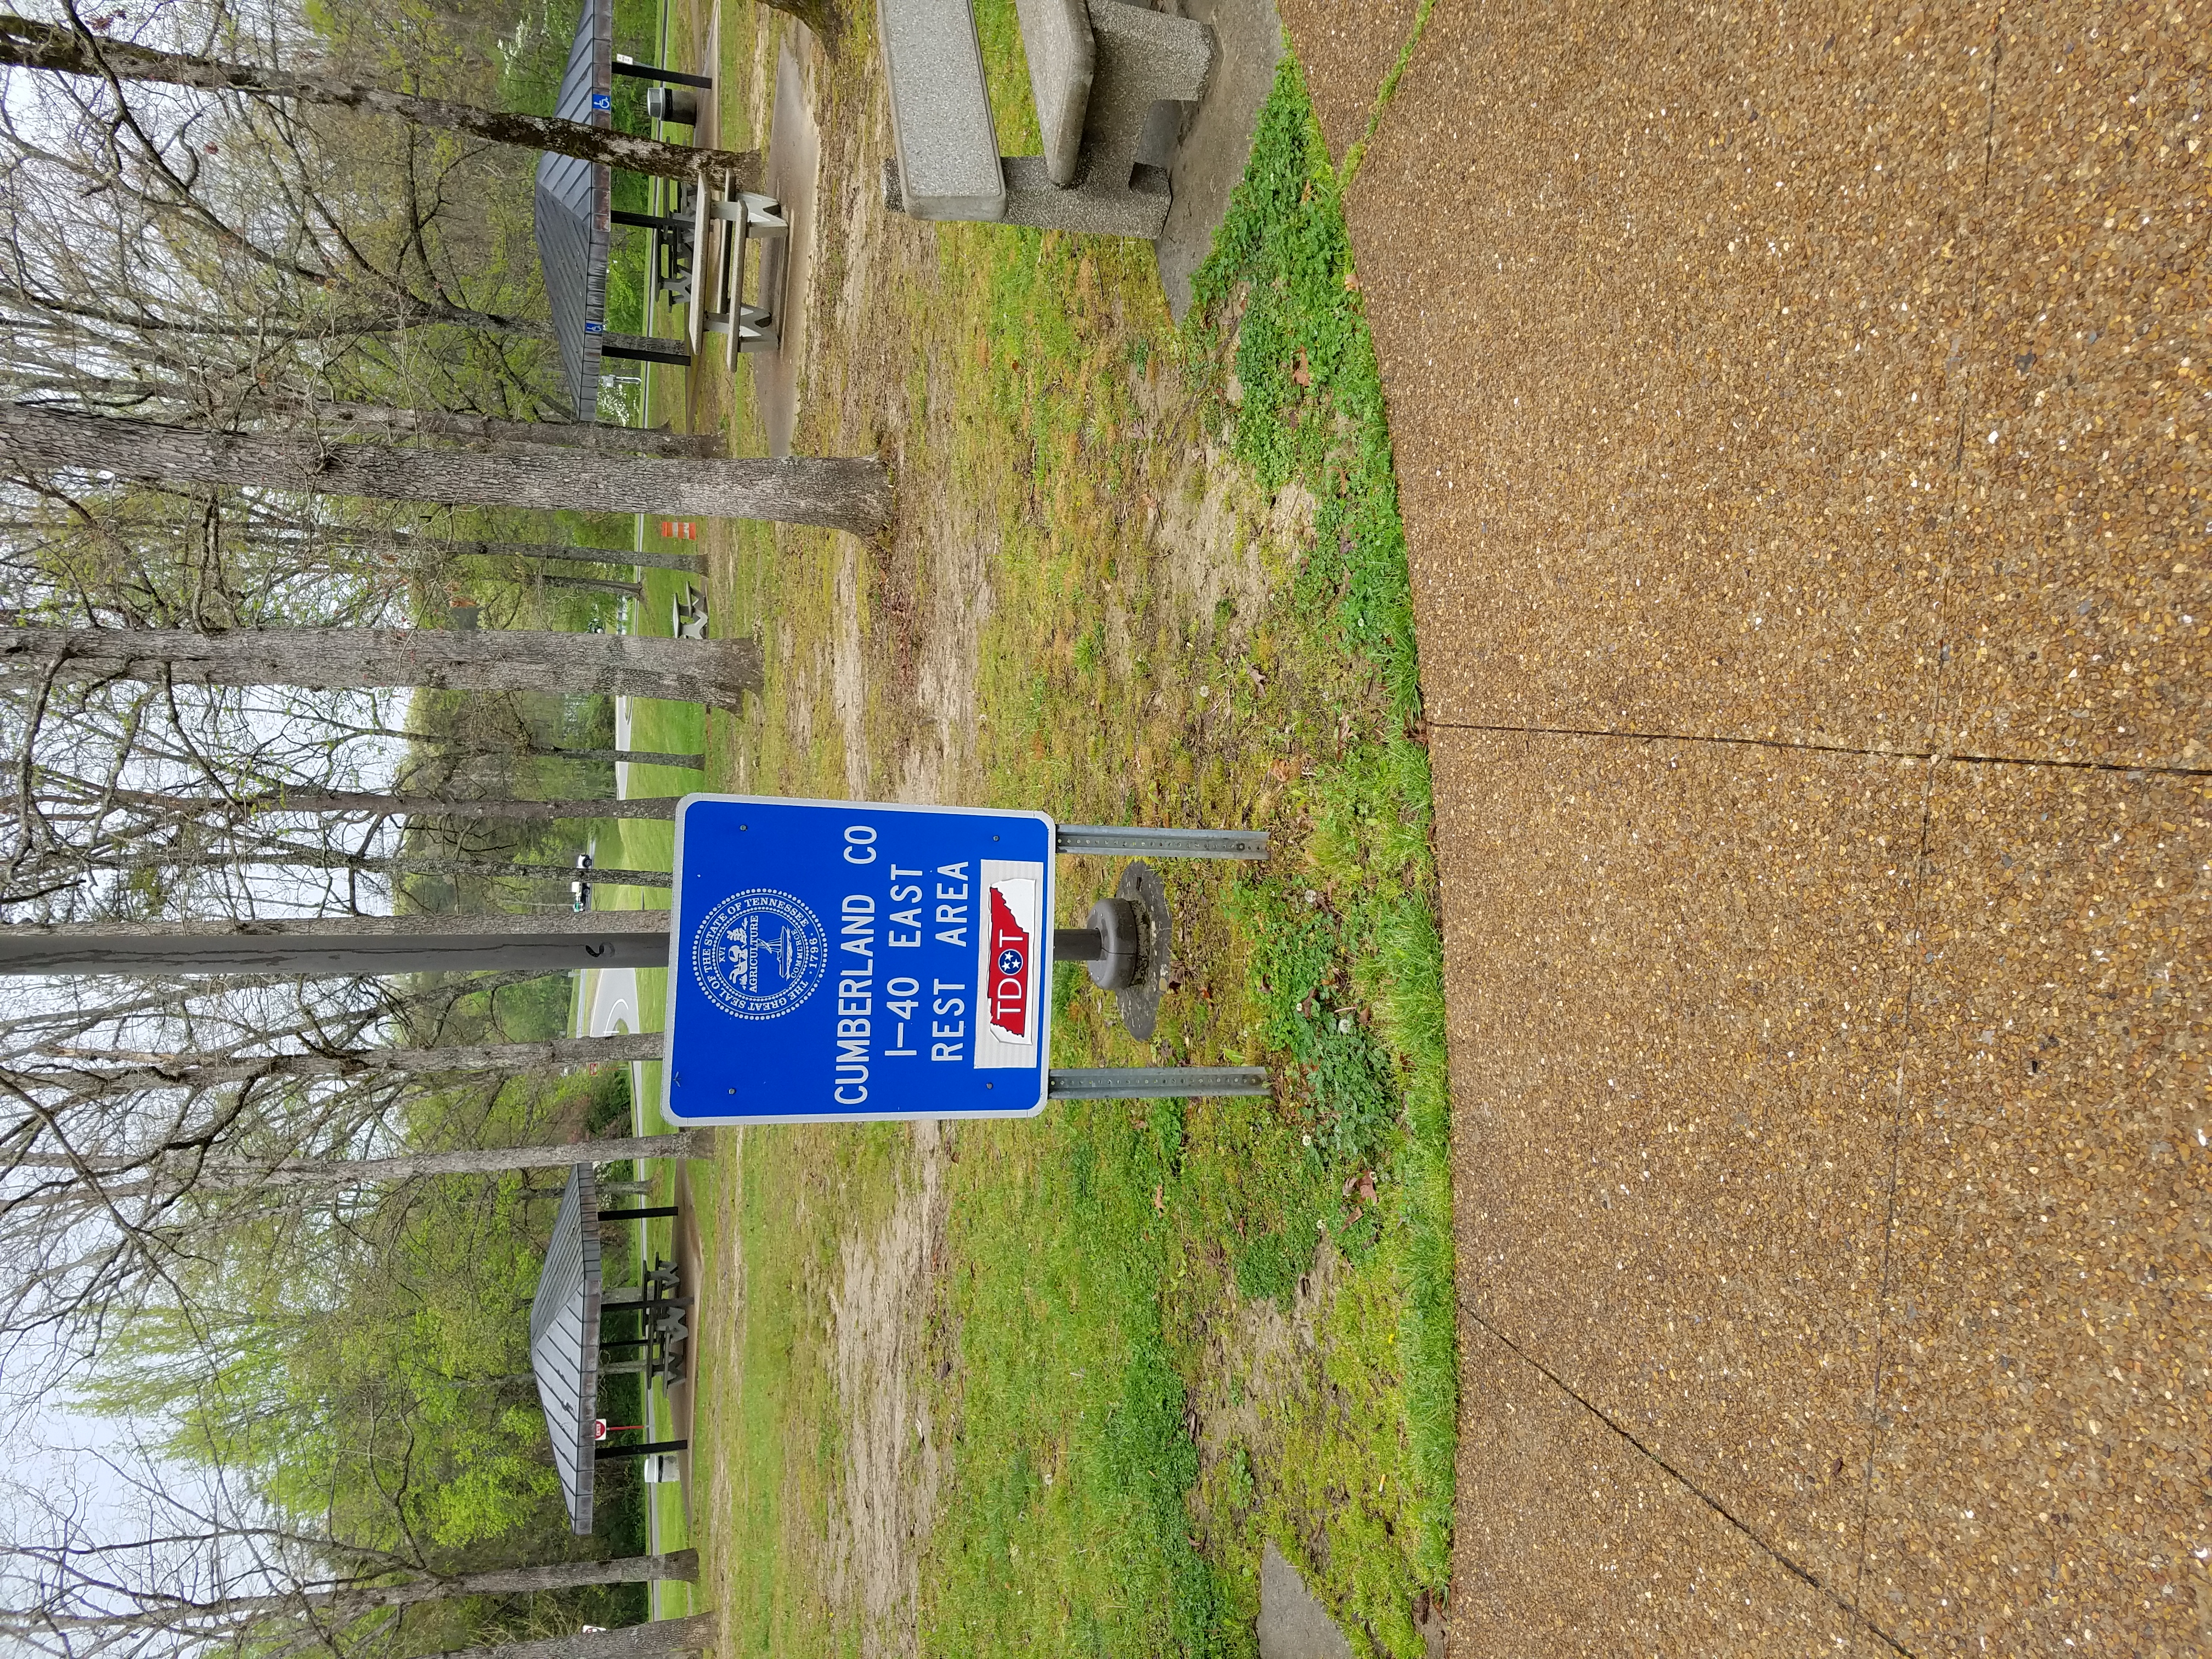 A rest area sign isn't picturesque, but it does set the location